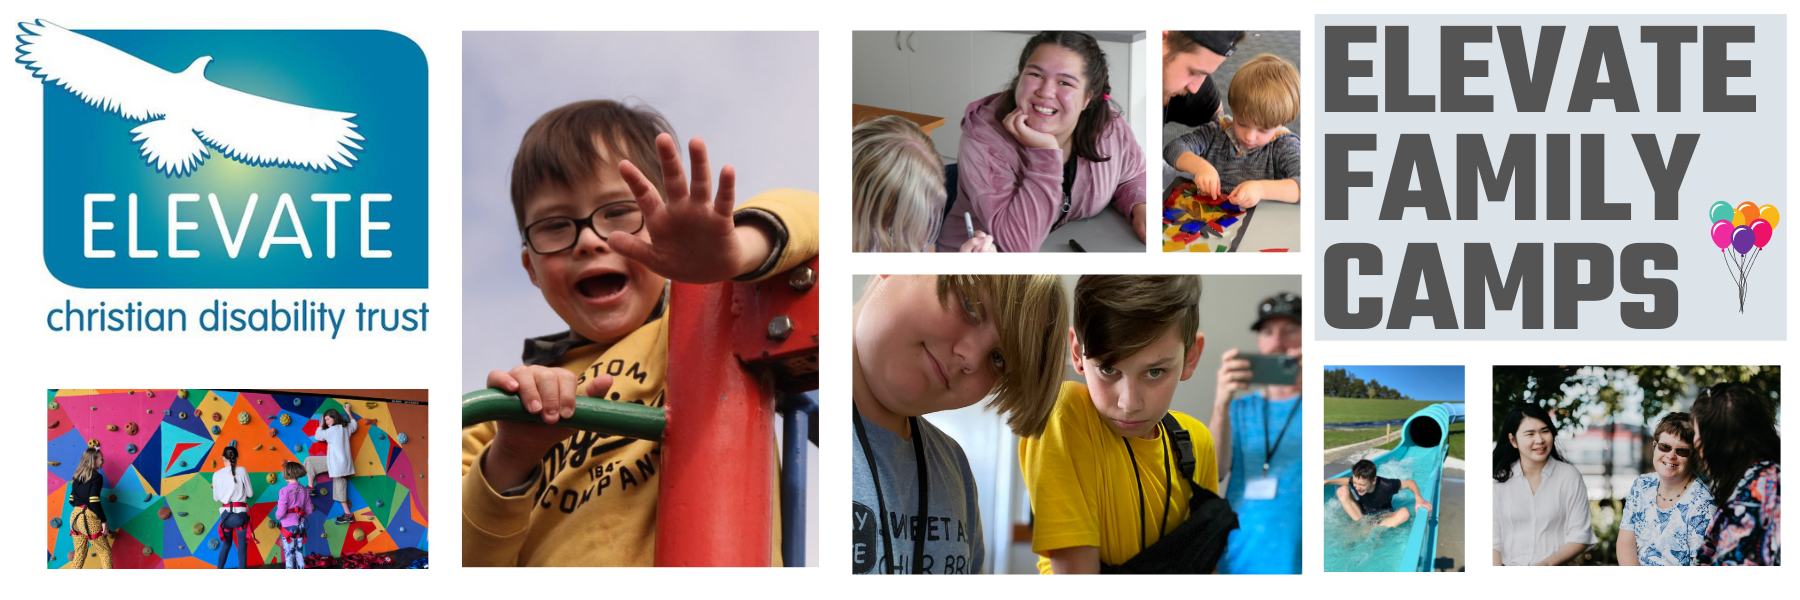 A selection of camp photos with children smiling, waving, doing crafts, rock climbing and parents chatting with the Elevate logo and the words 'Elevate Family Camps'